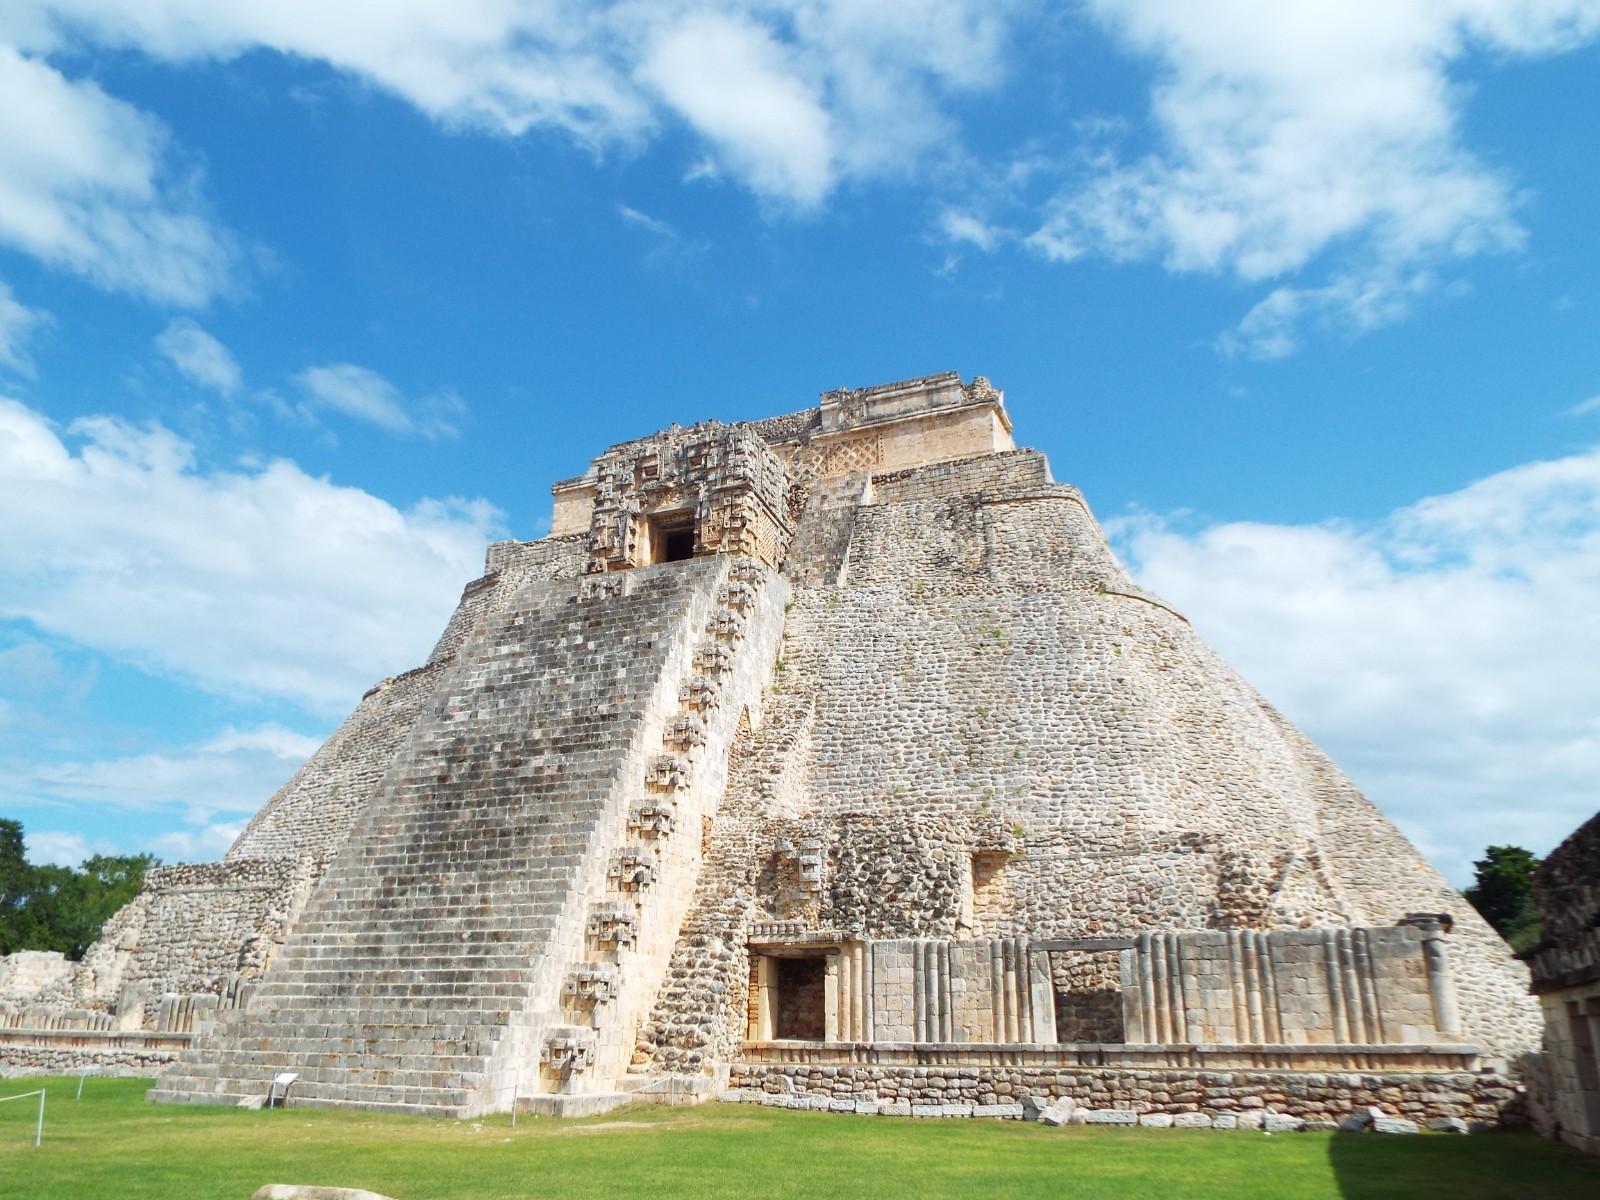 The Pyramid of the Magician, Uxmal